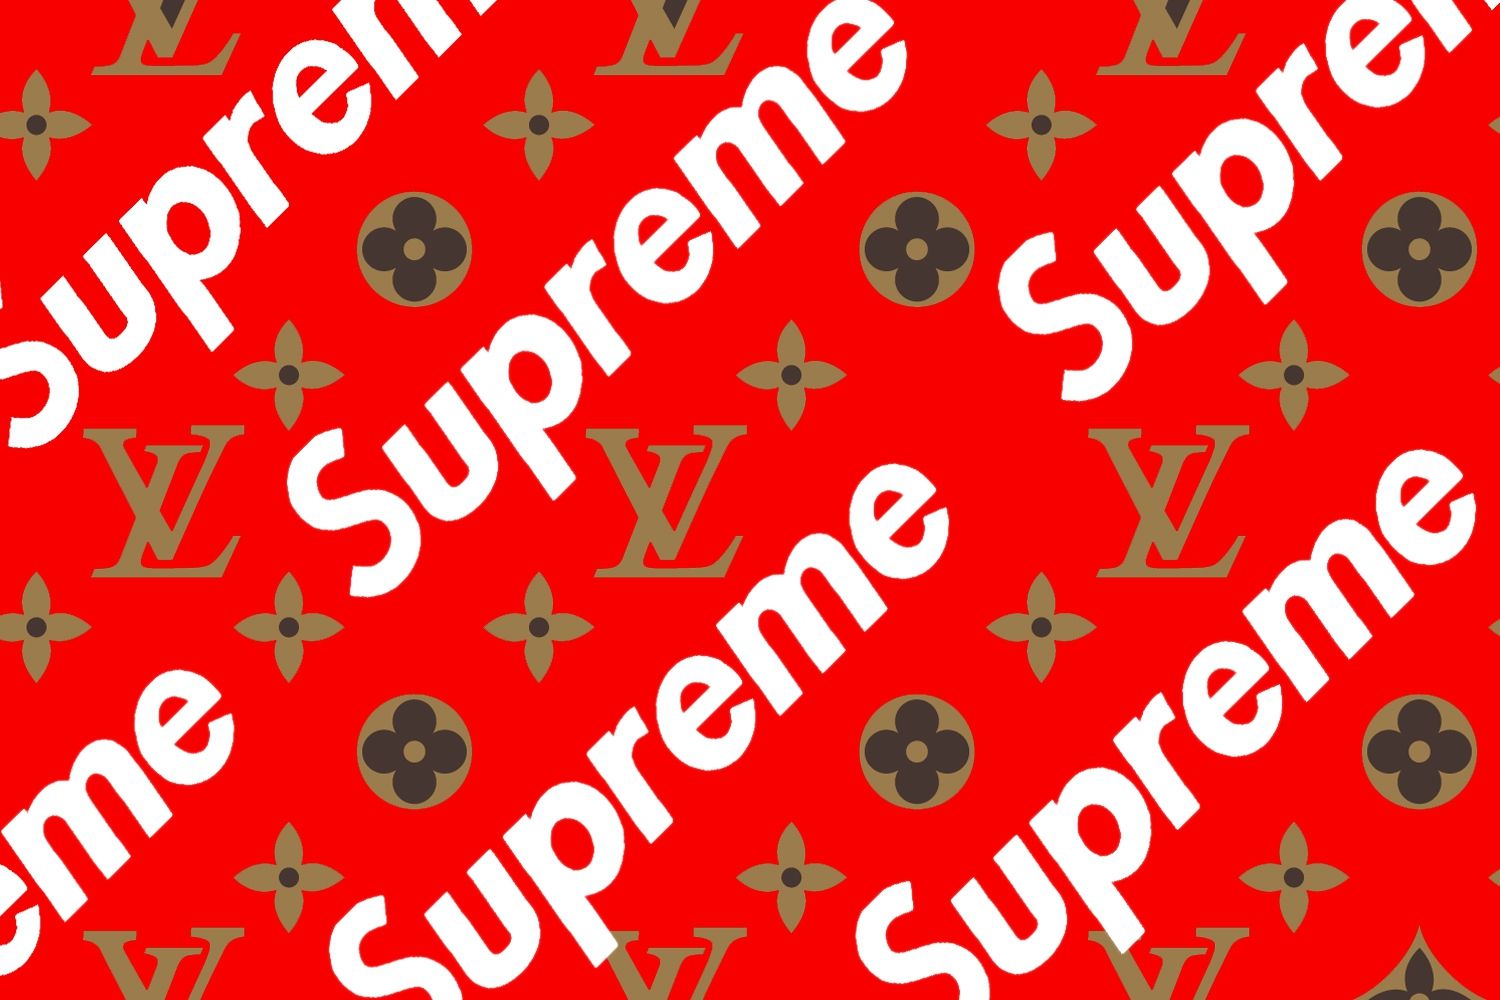 Supreme X Louis Vuitton Phone Background. The Art of Mike Mignola